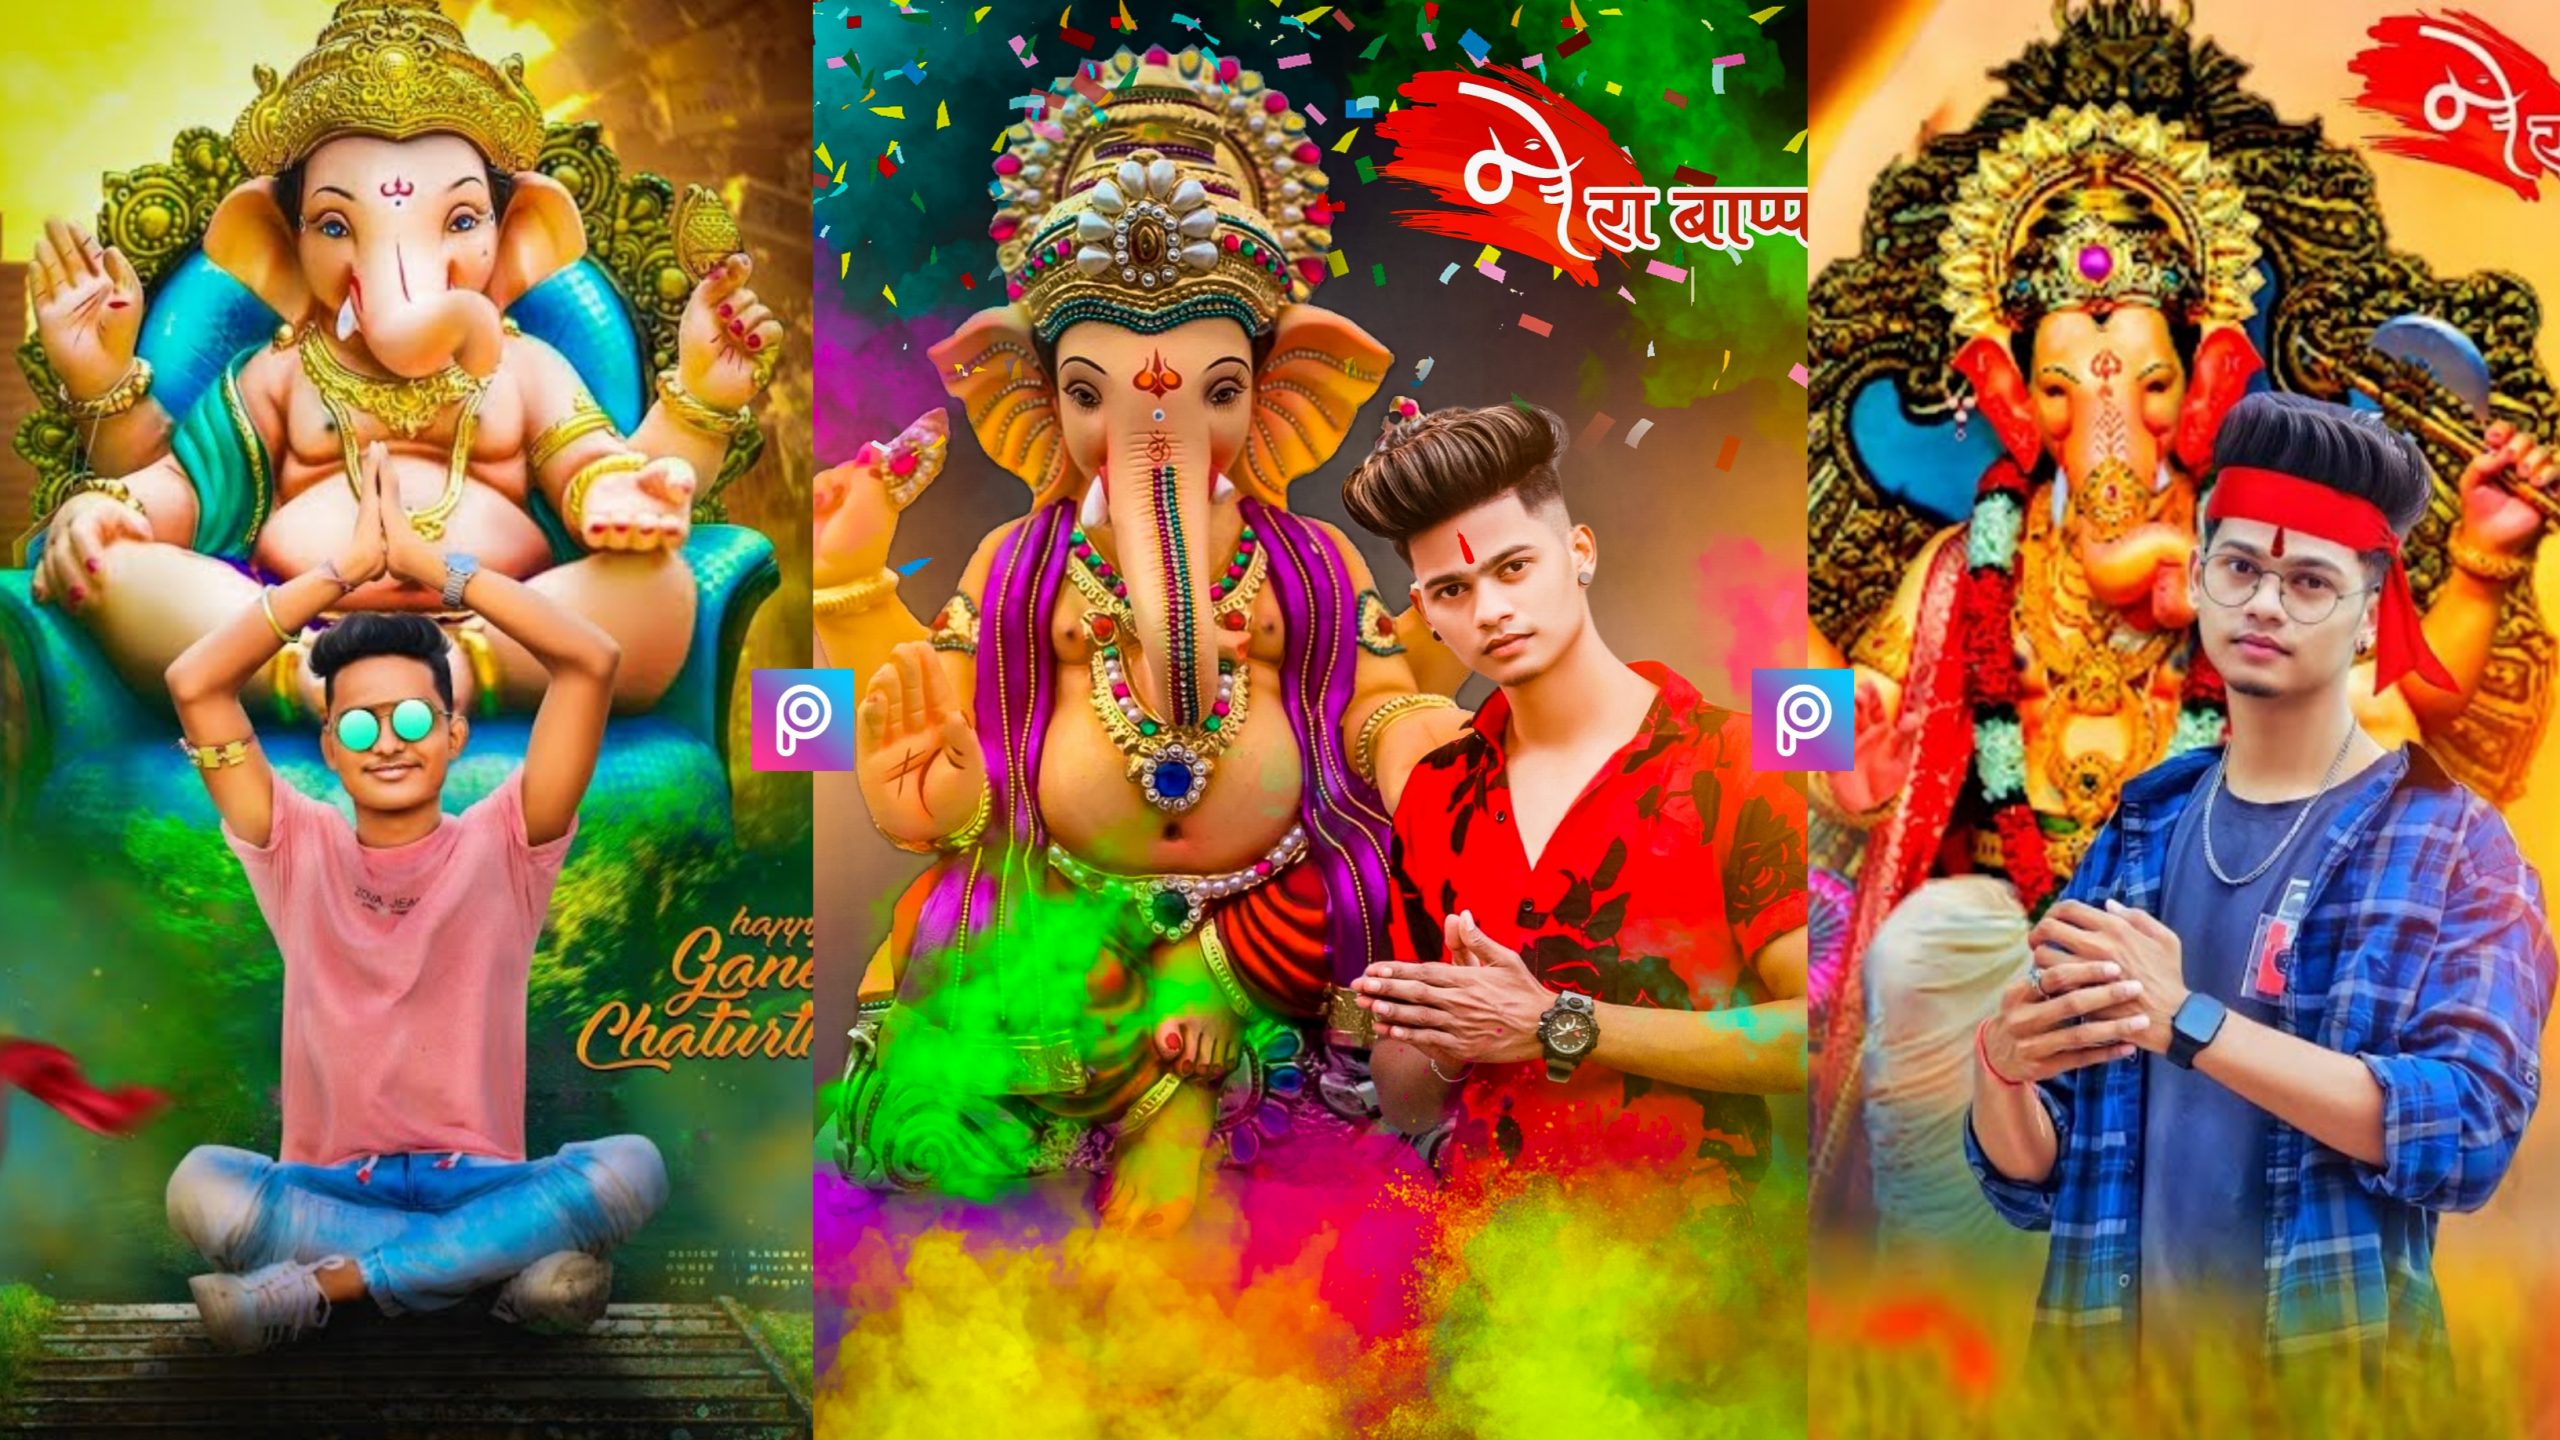 Ganesh Chaturthi Photo Editing Download Full HD Background And PNG Archives  - Tahir Editz